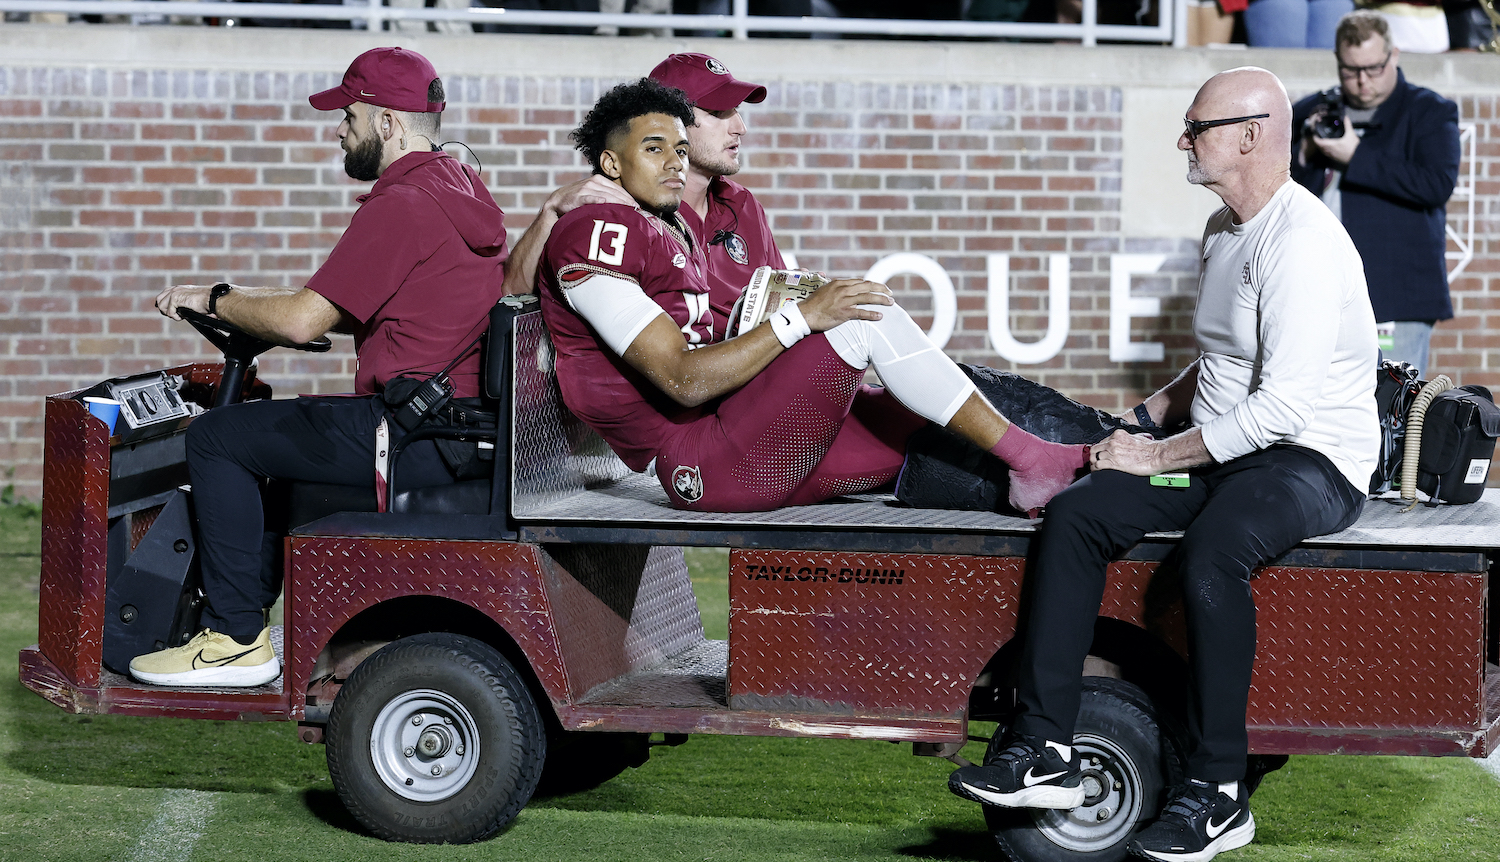 TALLAHASSEE, FL - NOVEMBER 18: Quarterback Jordan Travis #13 of the Florida State Seminoles is carted off the field after an ankle jury during the game against the North Alabama Lions on Bobby Bowden Field at Doak Campbell Stadium on November 18, 2023 in Tallahassee, Florida. The 4th ranked Seminoles defeated the Lions 58 to 13. (Photo by Don Juan Moore/Getty Images) *** Local Caption *** Jordan Travis